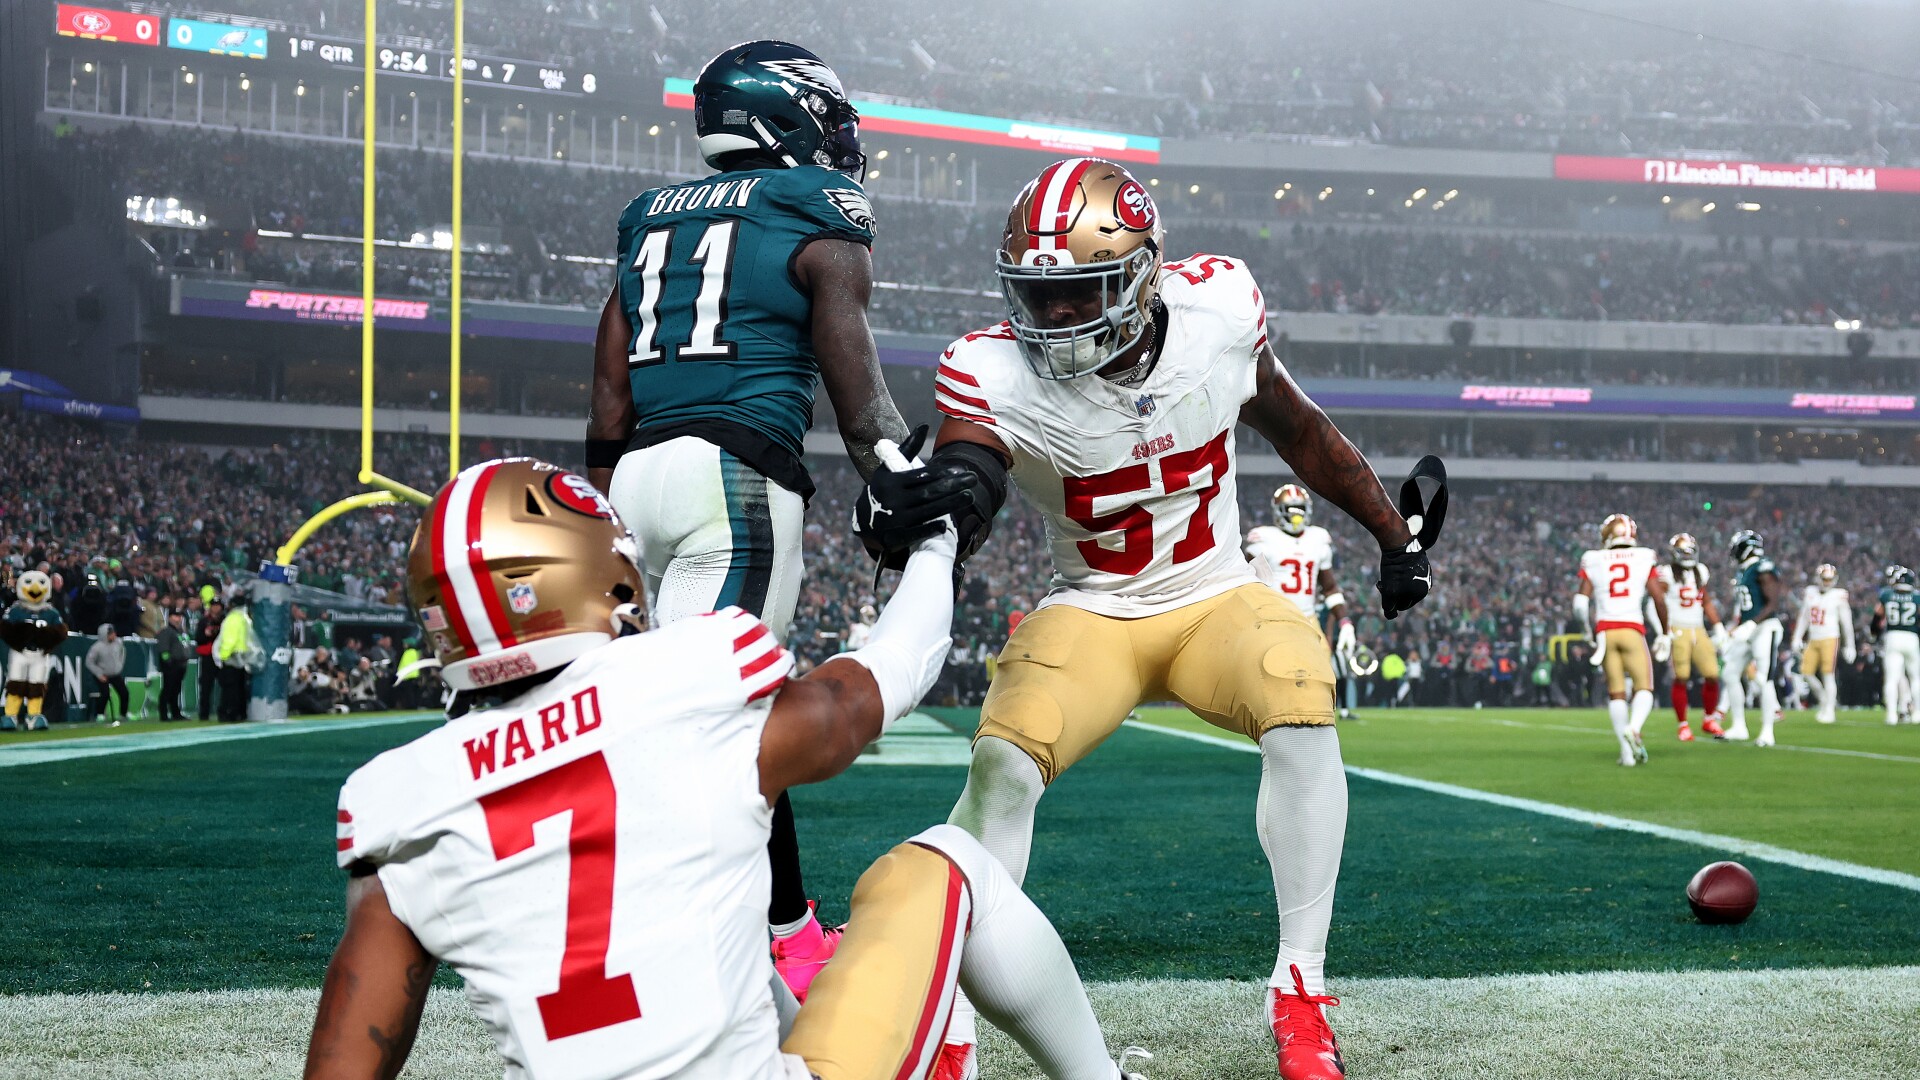 dre greenlaw ejected, eagles cut 49ers lead to 21-13